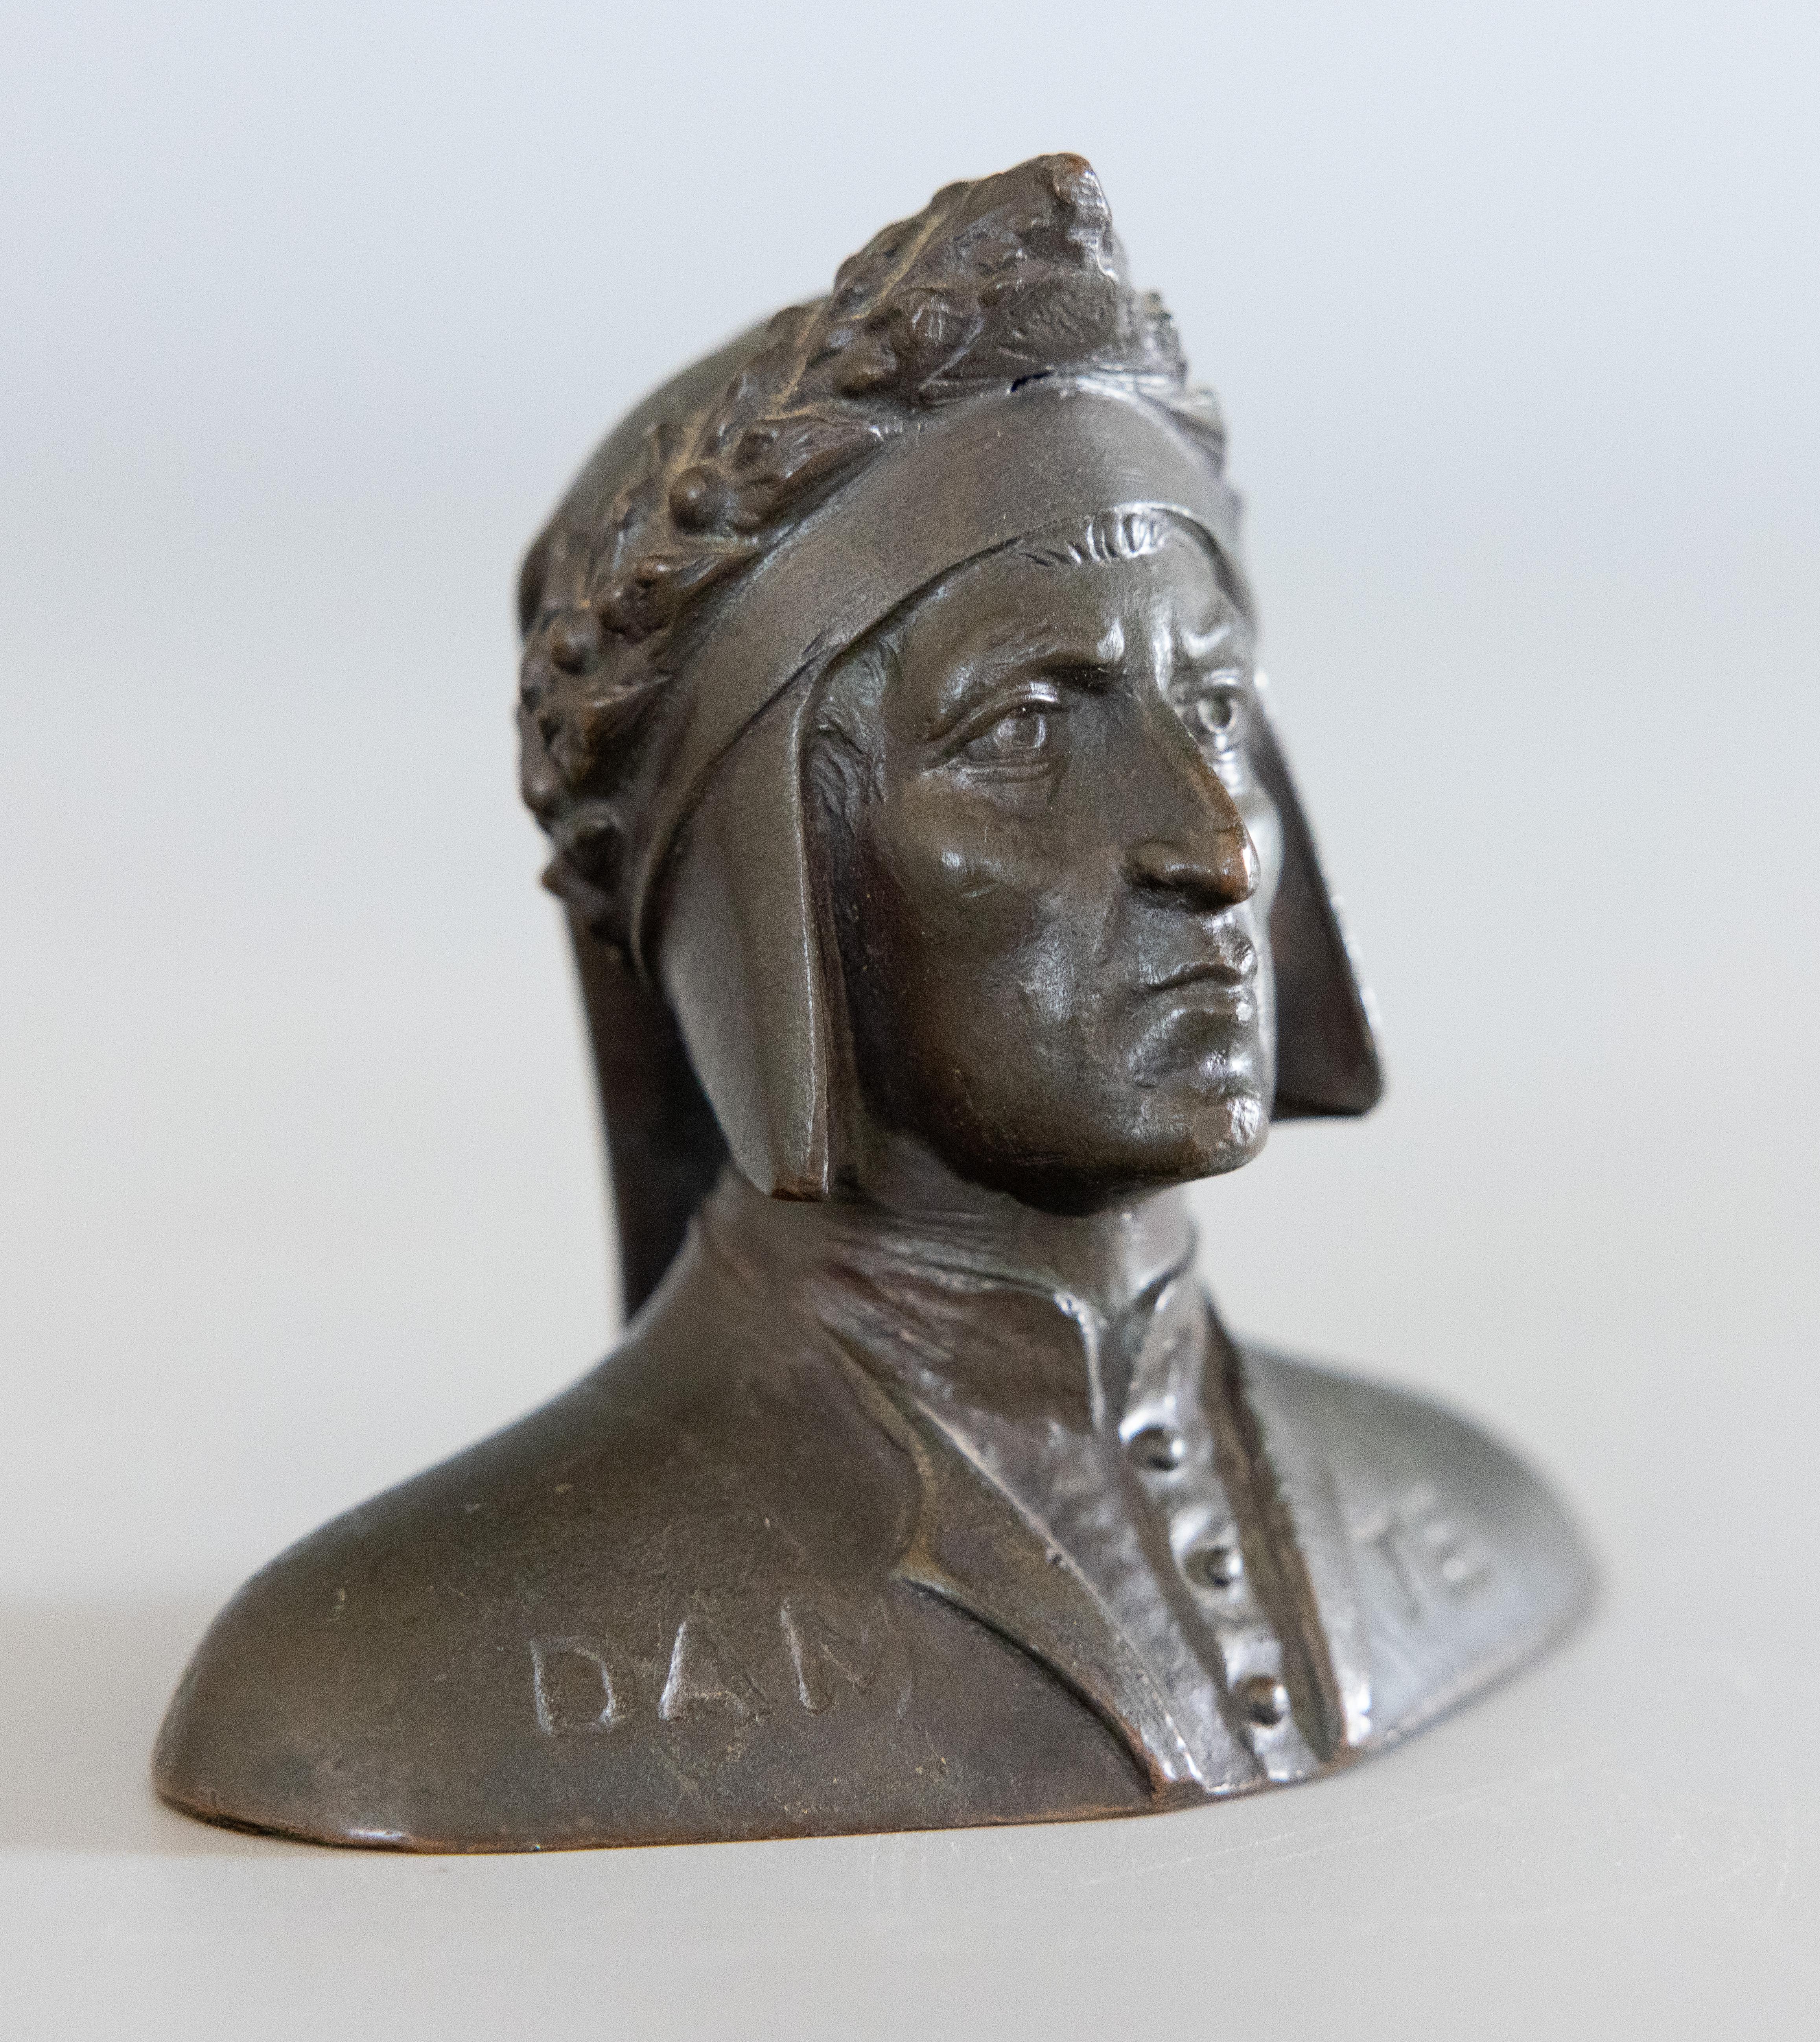 A fine antique 19th Century petite Grand Tour souvenir bronze bust of Italian poet Dante Alighieri. This handsome bust is well cast with exquisite details and lovely original patina. It would perfect on a desk or bookshelf in a library or study.

In